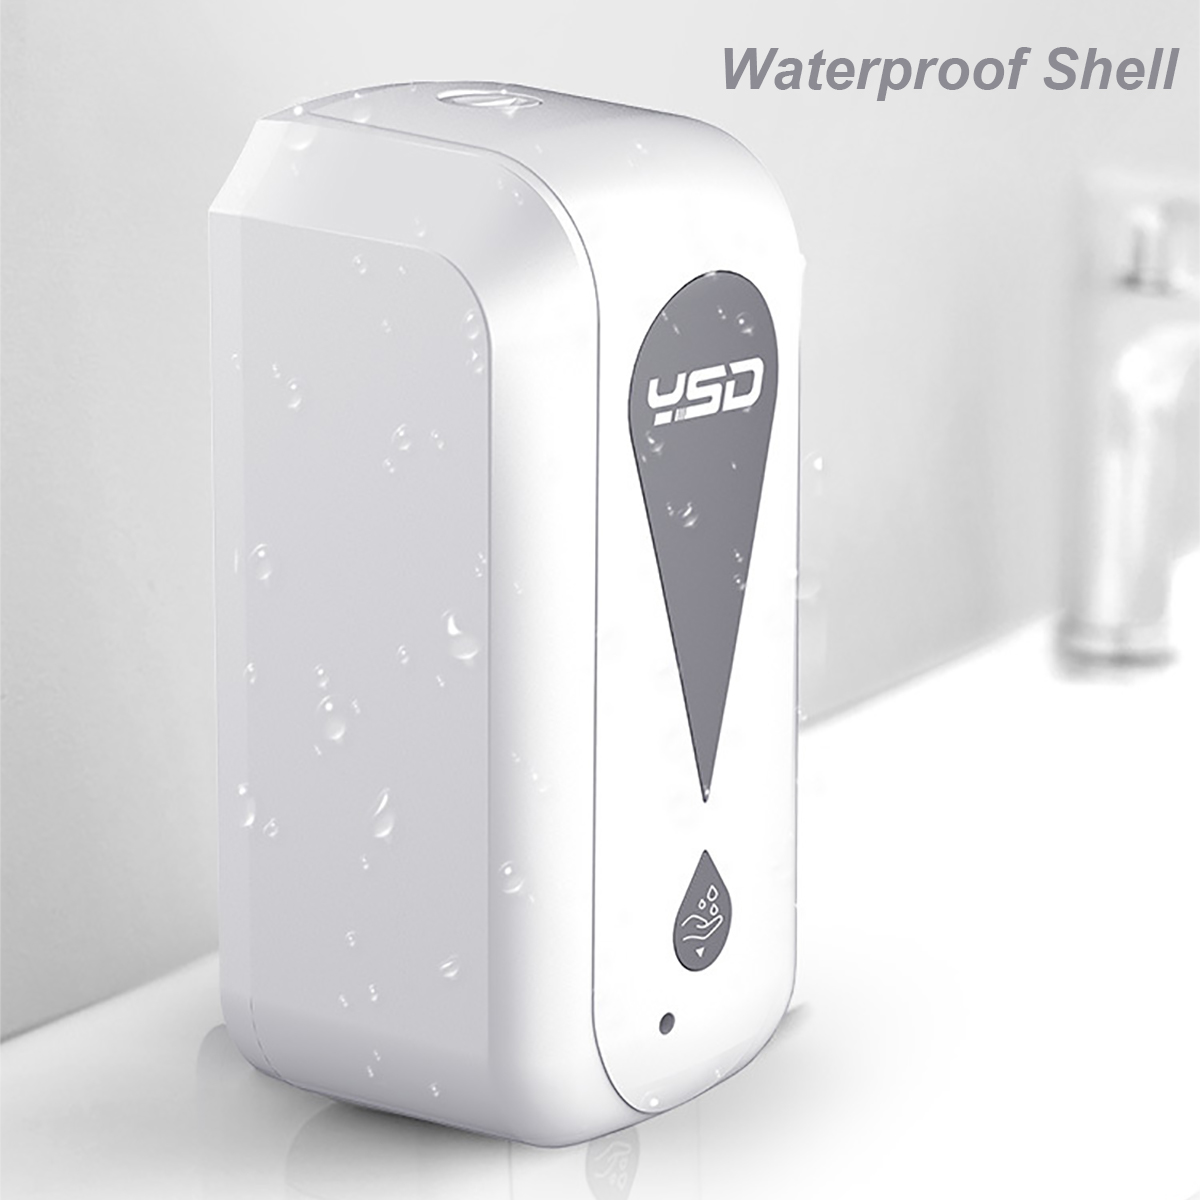 Find 1200mL Automatic Infrared Sensor Hand Free Touchless Spray Foam Soap Dispenser for Sale on Gipsybee.com with cryptocurrencies